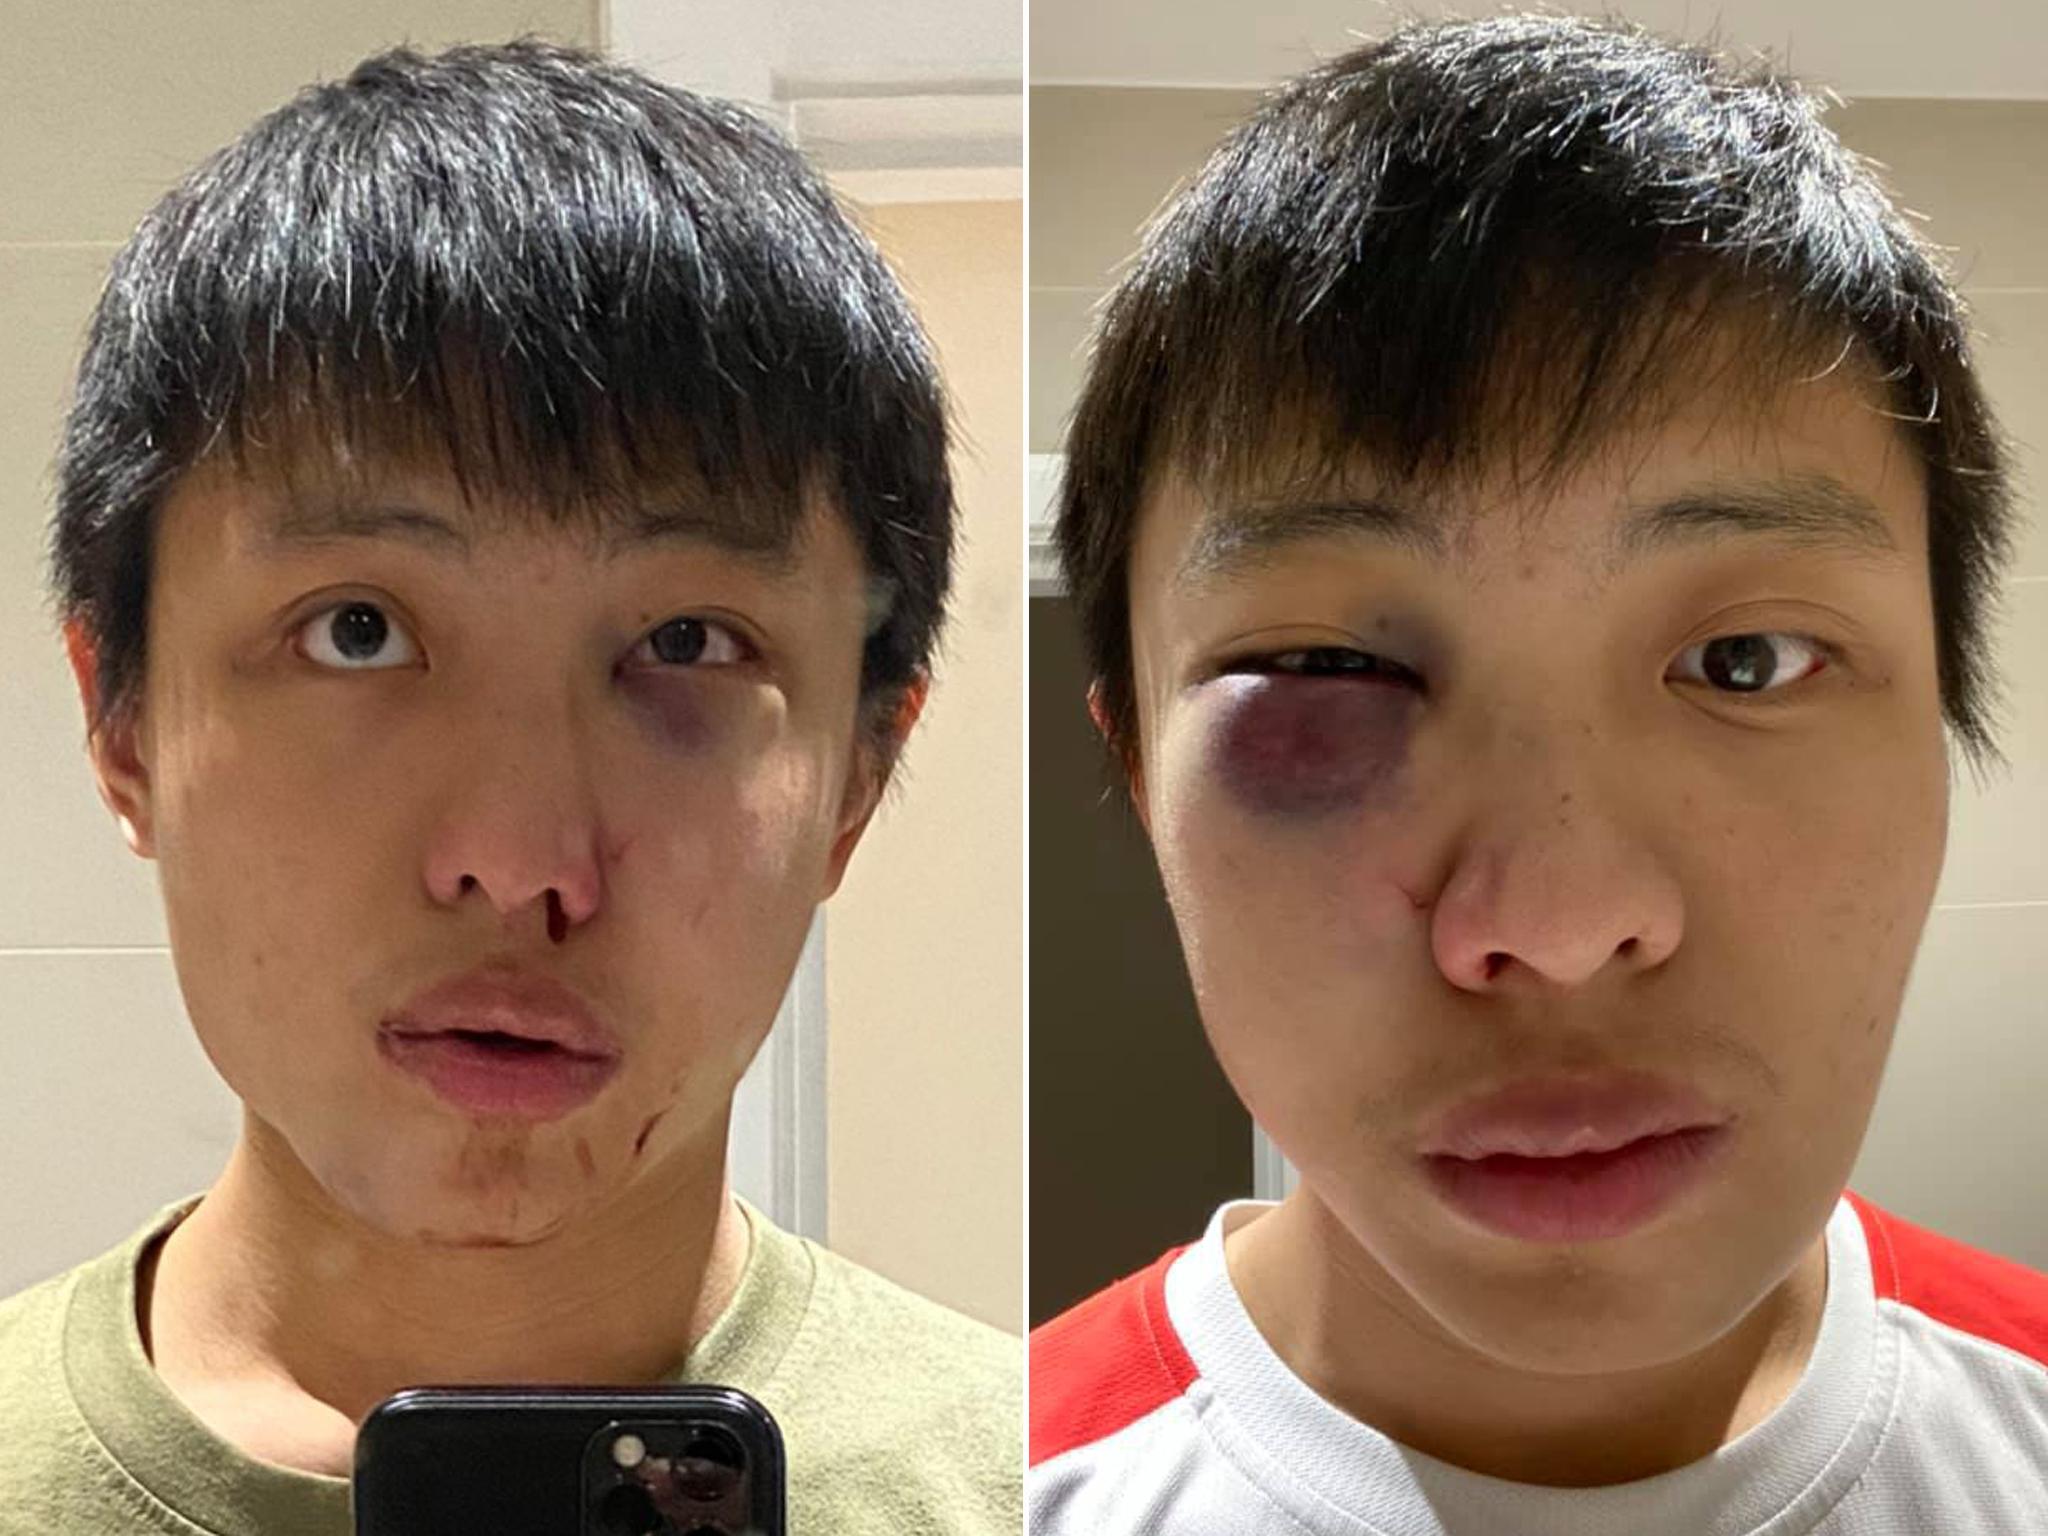 Singaporean law student Jonathan Mok, 24, suffered fractured nose and broken cheekbone following assault on Oxford Street and needed surgery on his face